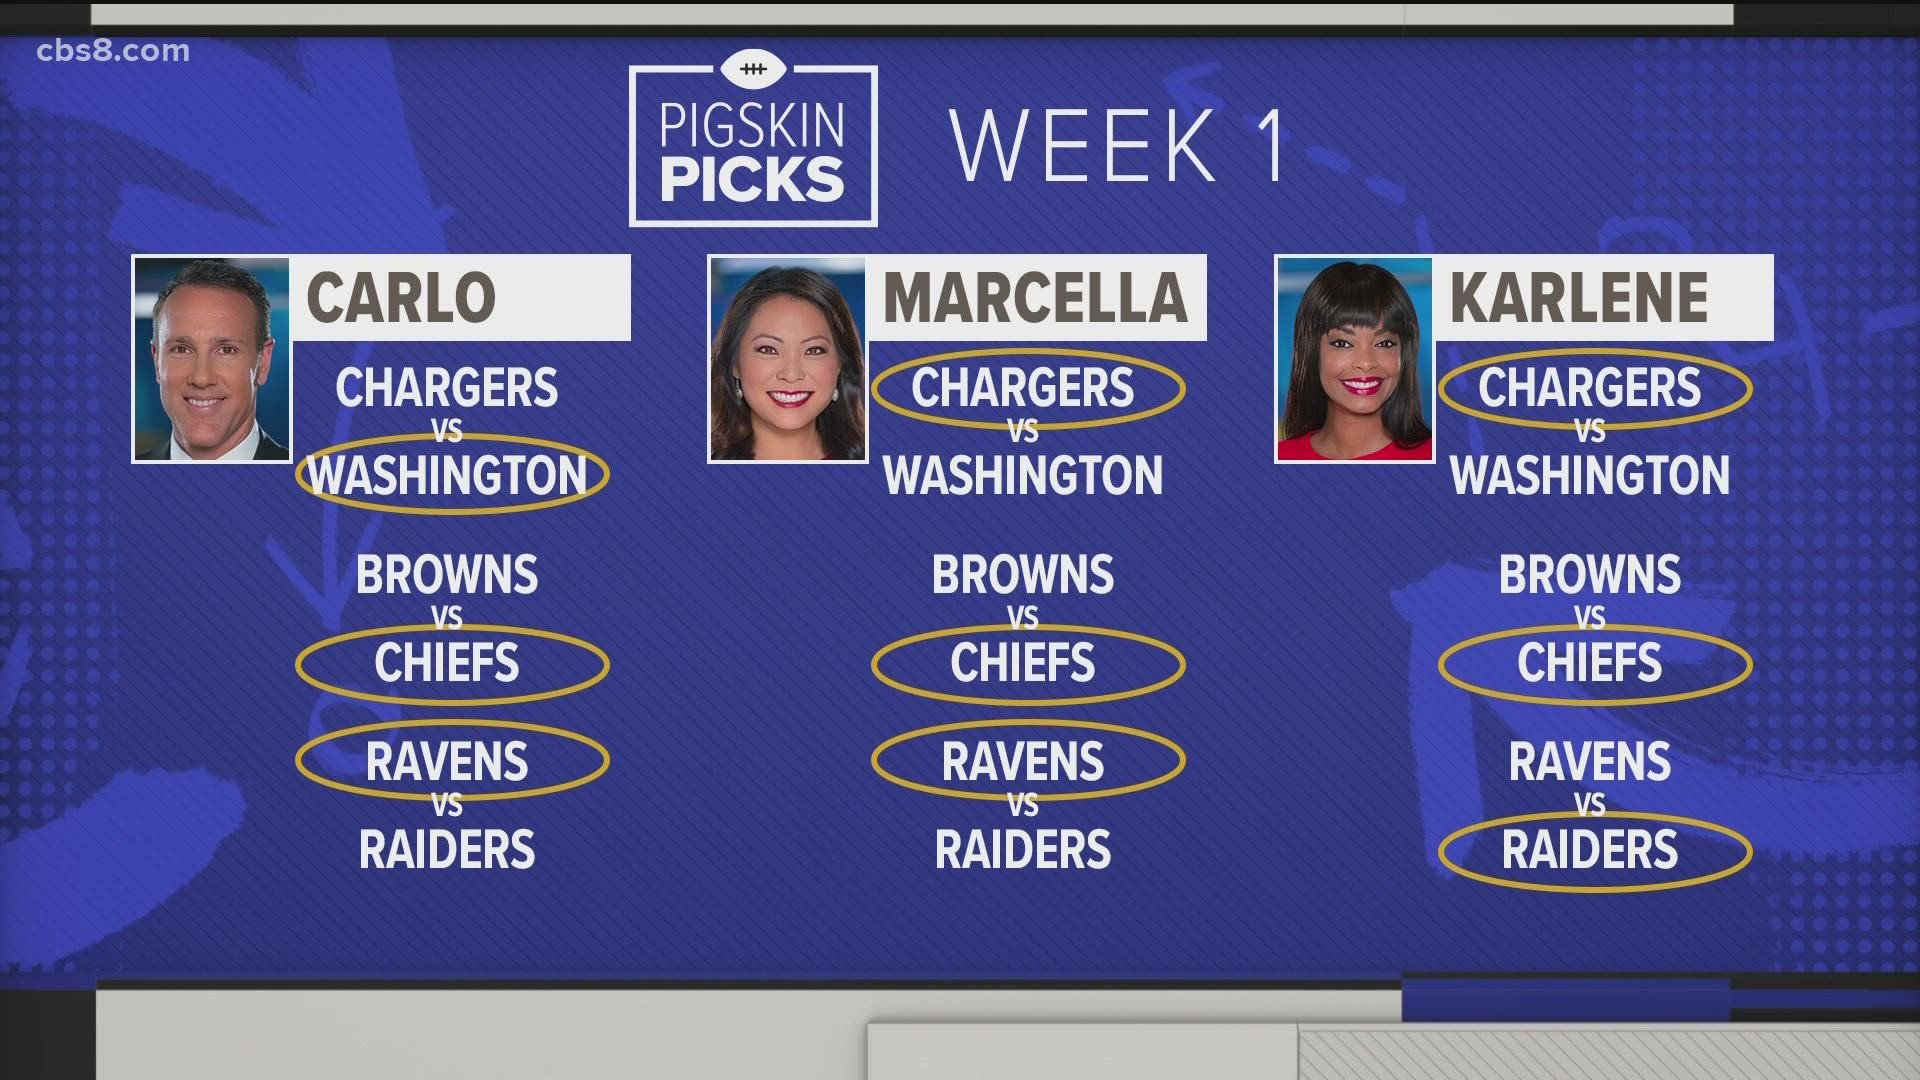 Anyone can play along at cbs8.com/pigskin to see how your picks compare to the CBS 8 mornings vs. evenings vs. the sports anchor teams.